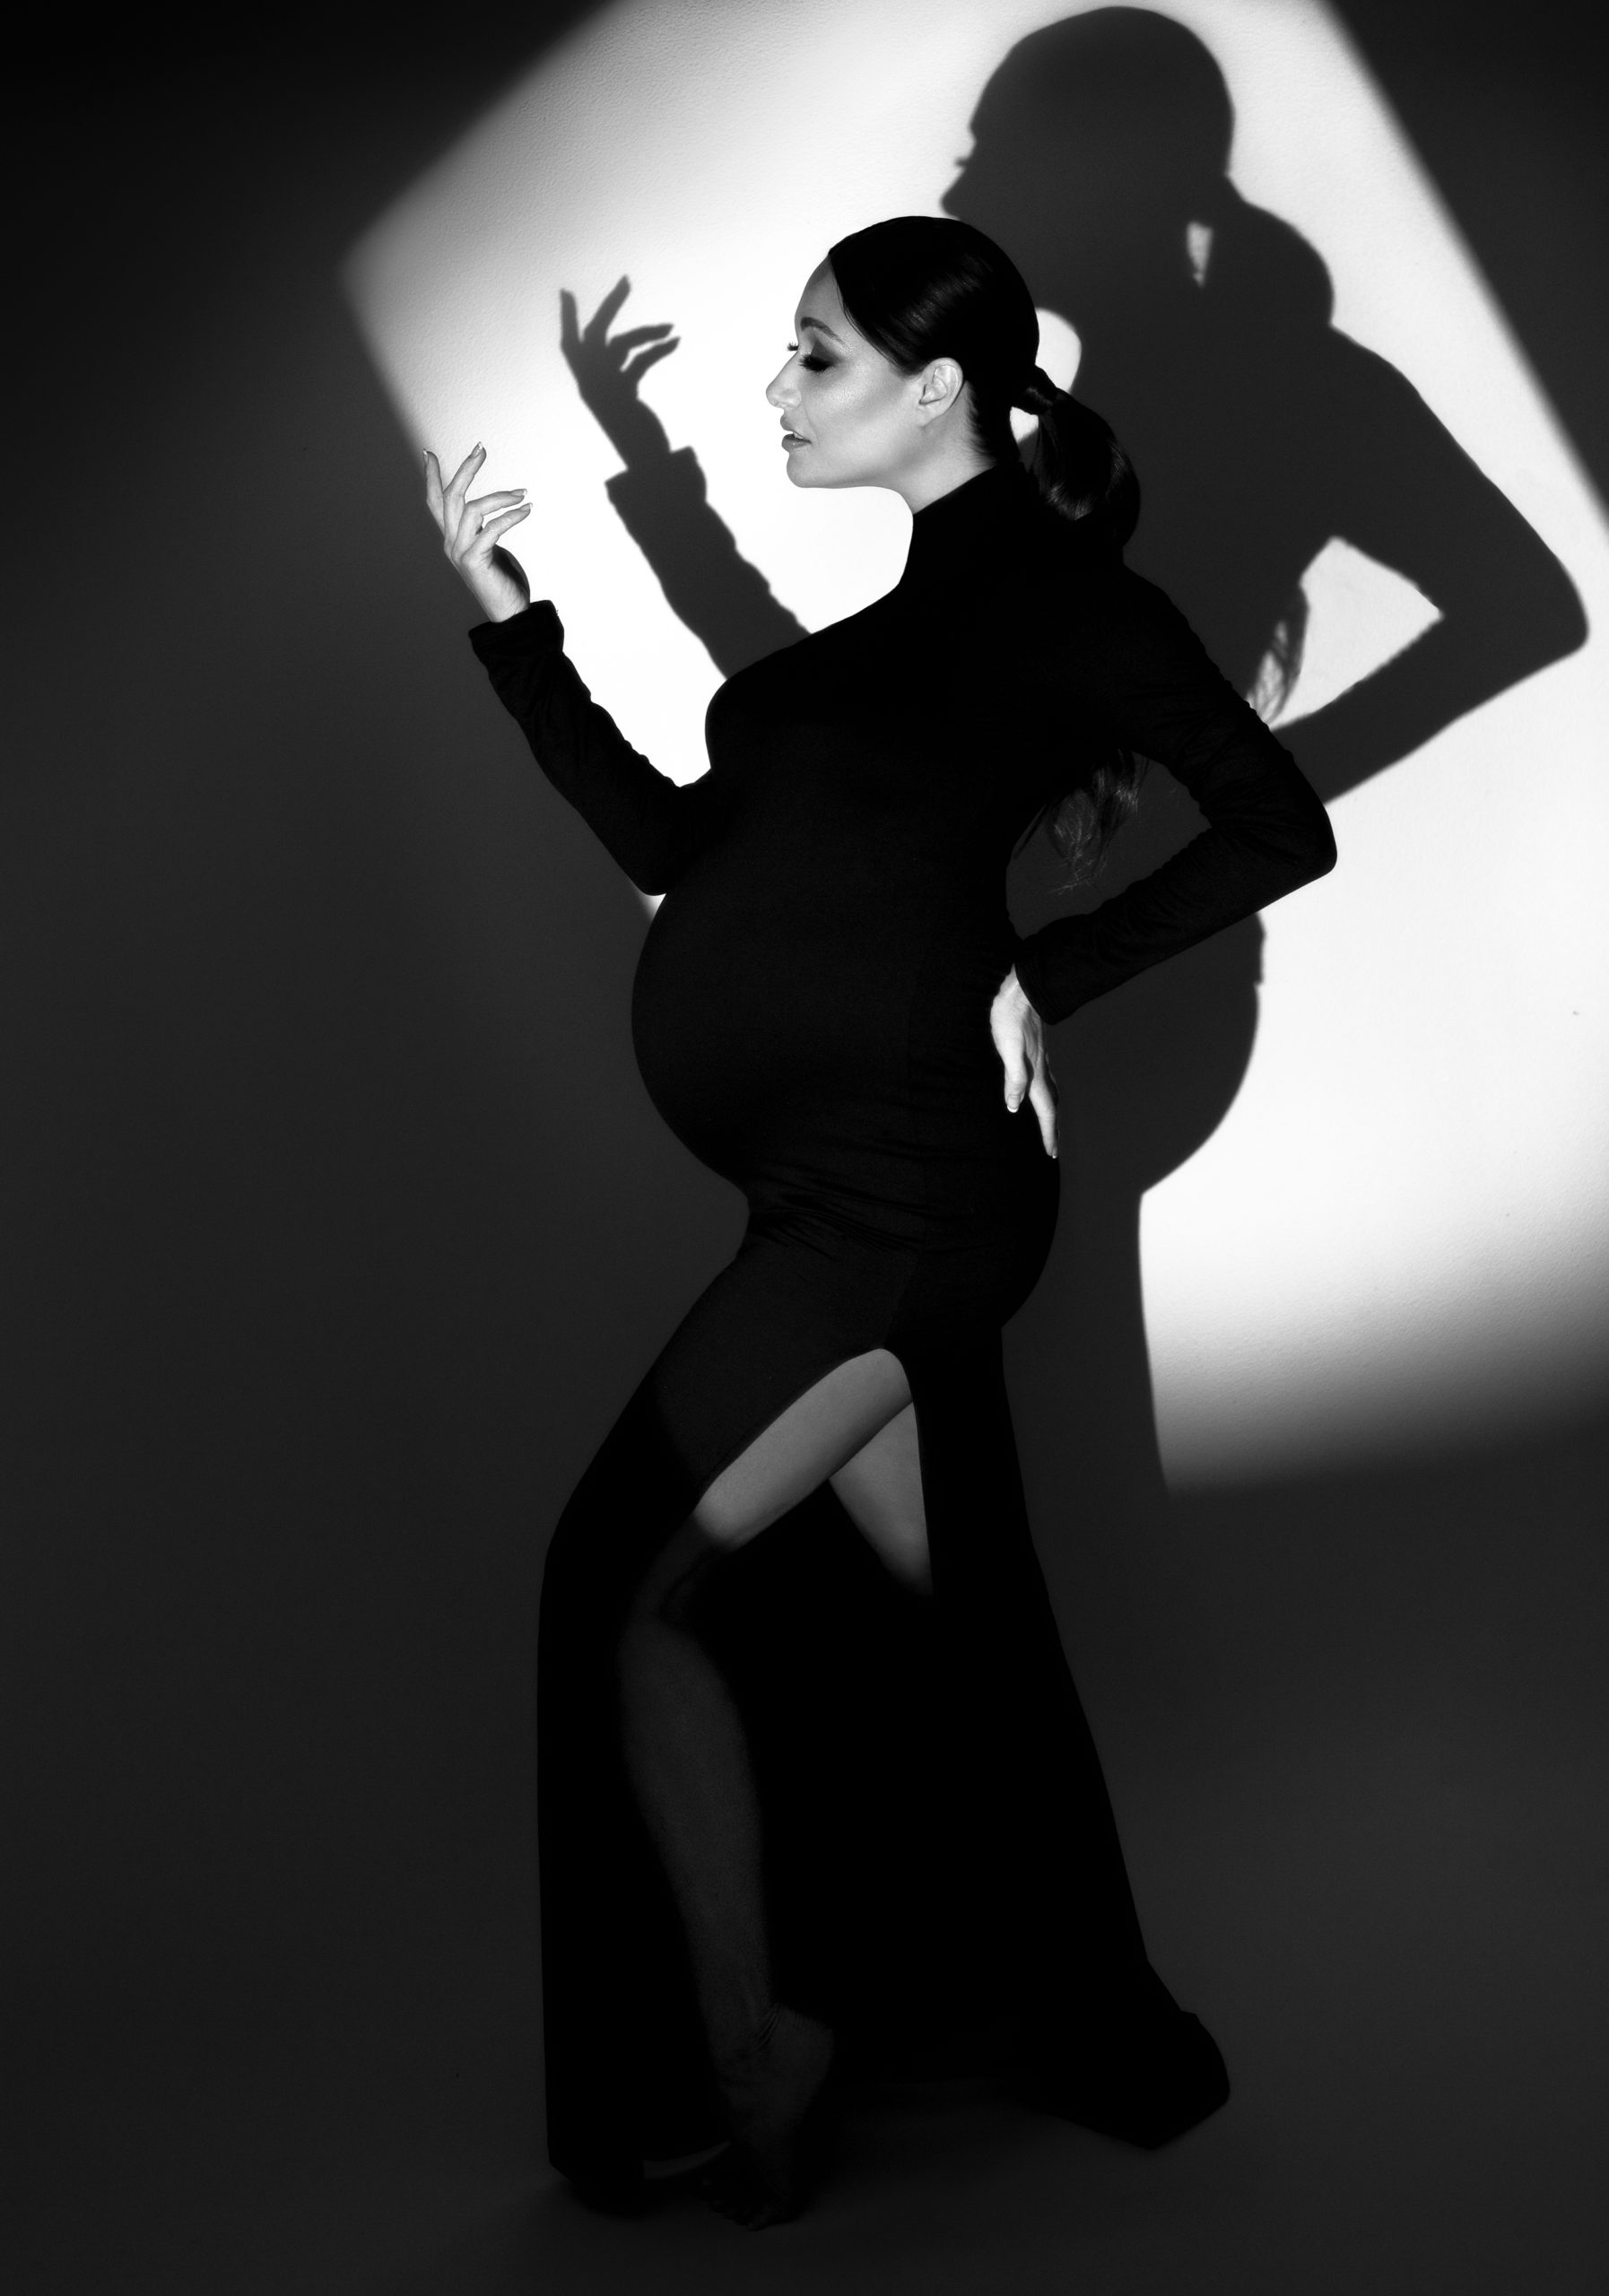 Fashion style maternity photograph of a woman in a black dress